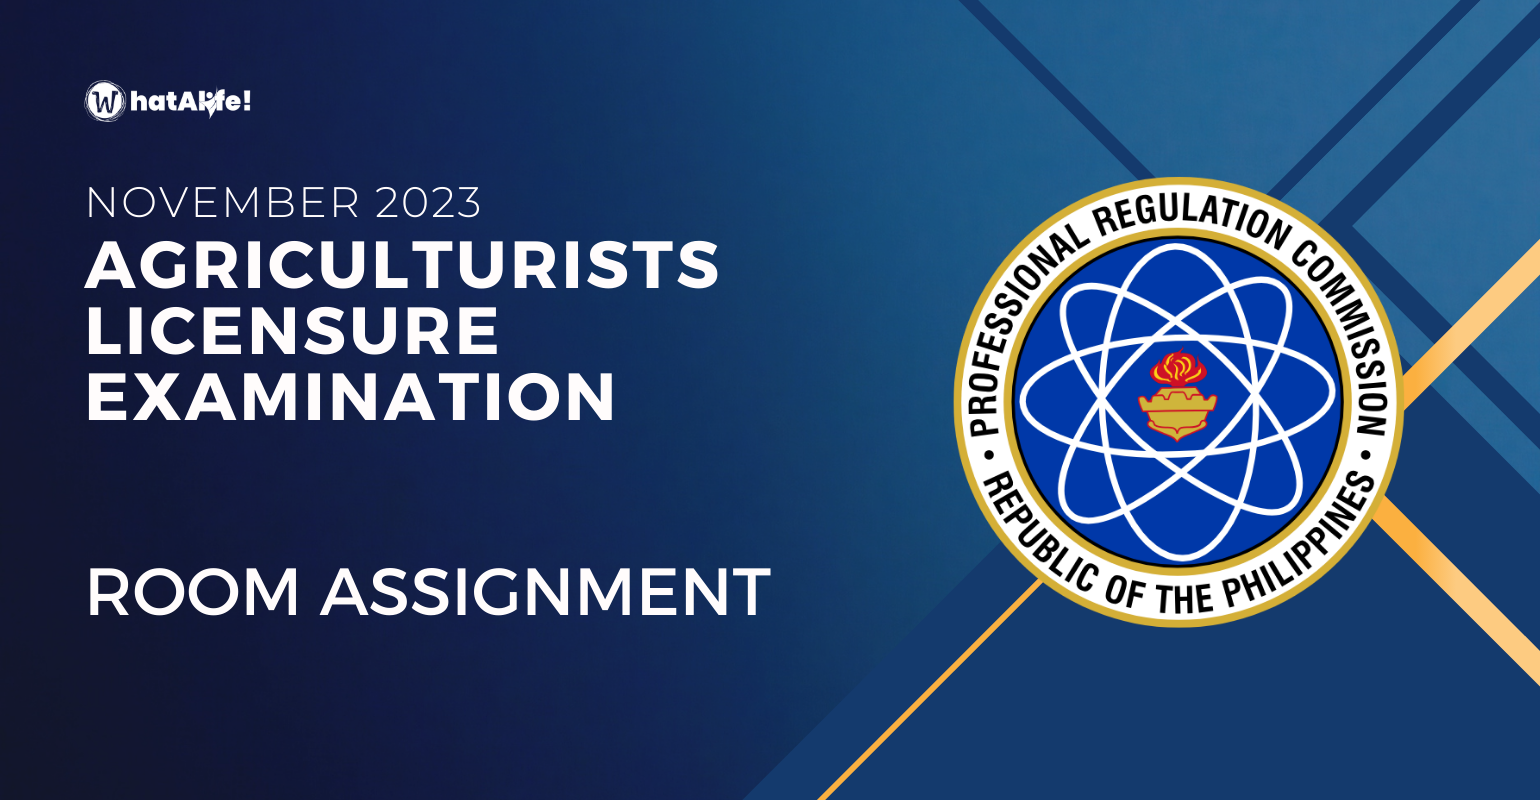 Room Assignment — November 2023 Agriculturists Licensure Exam